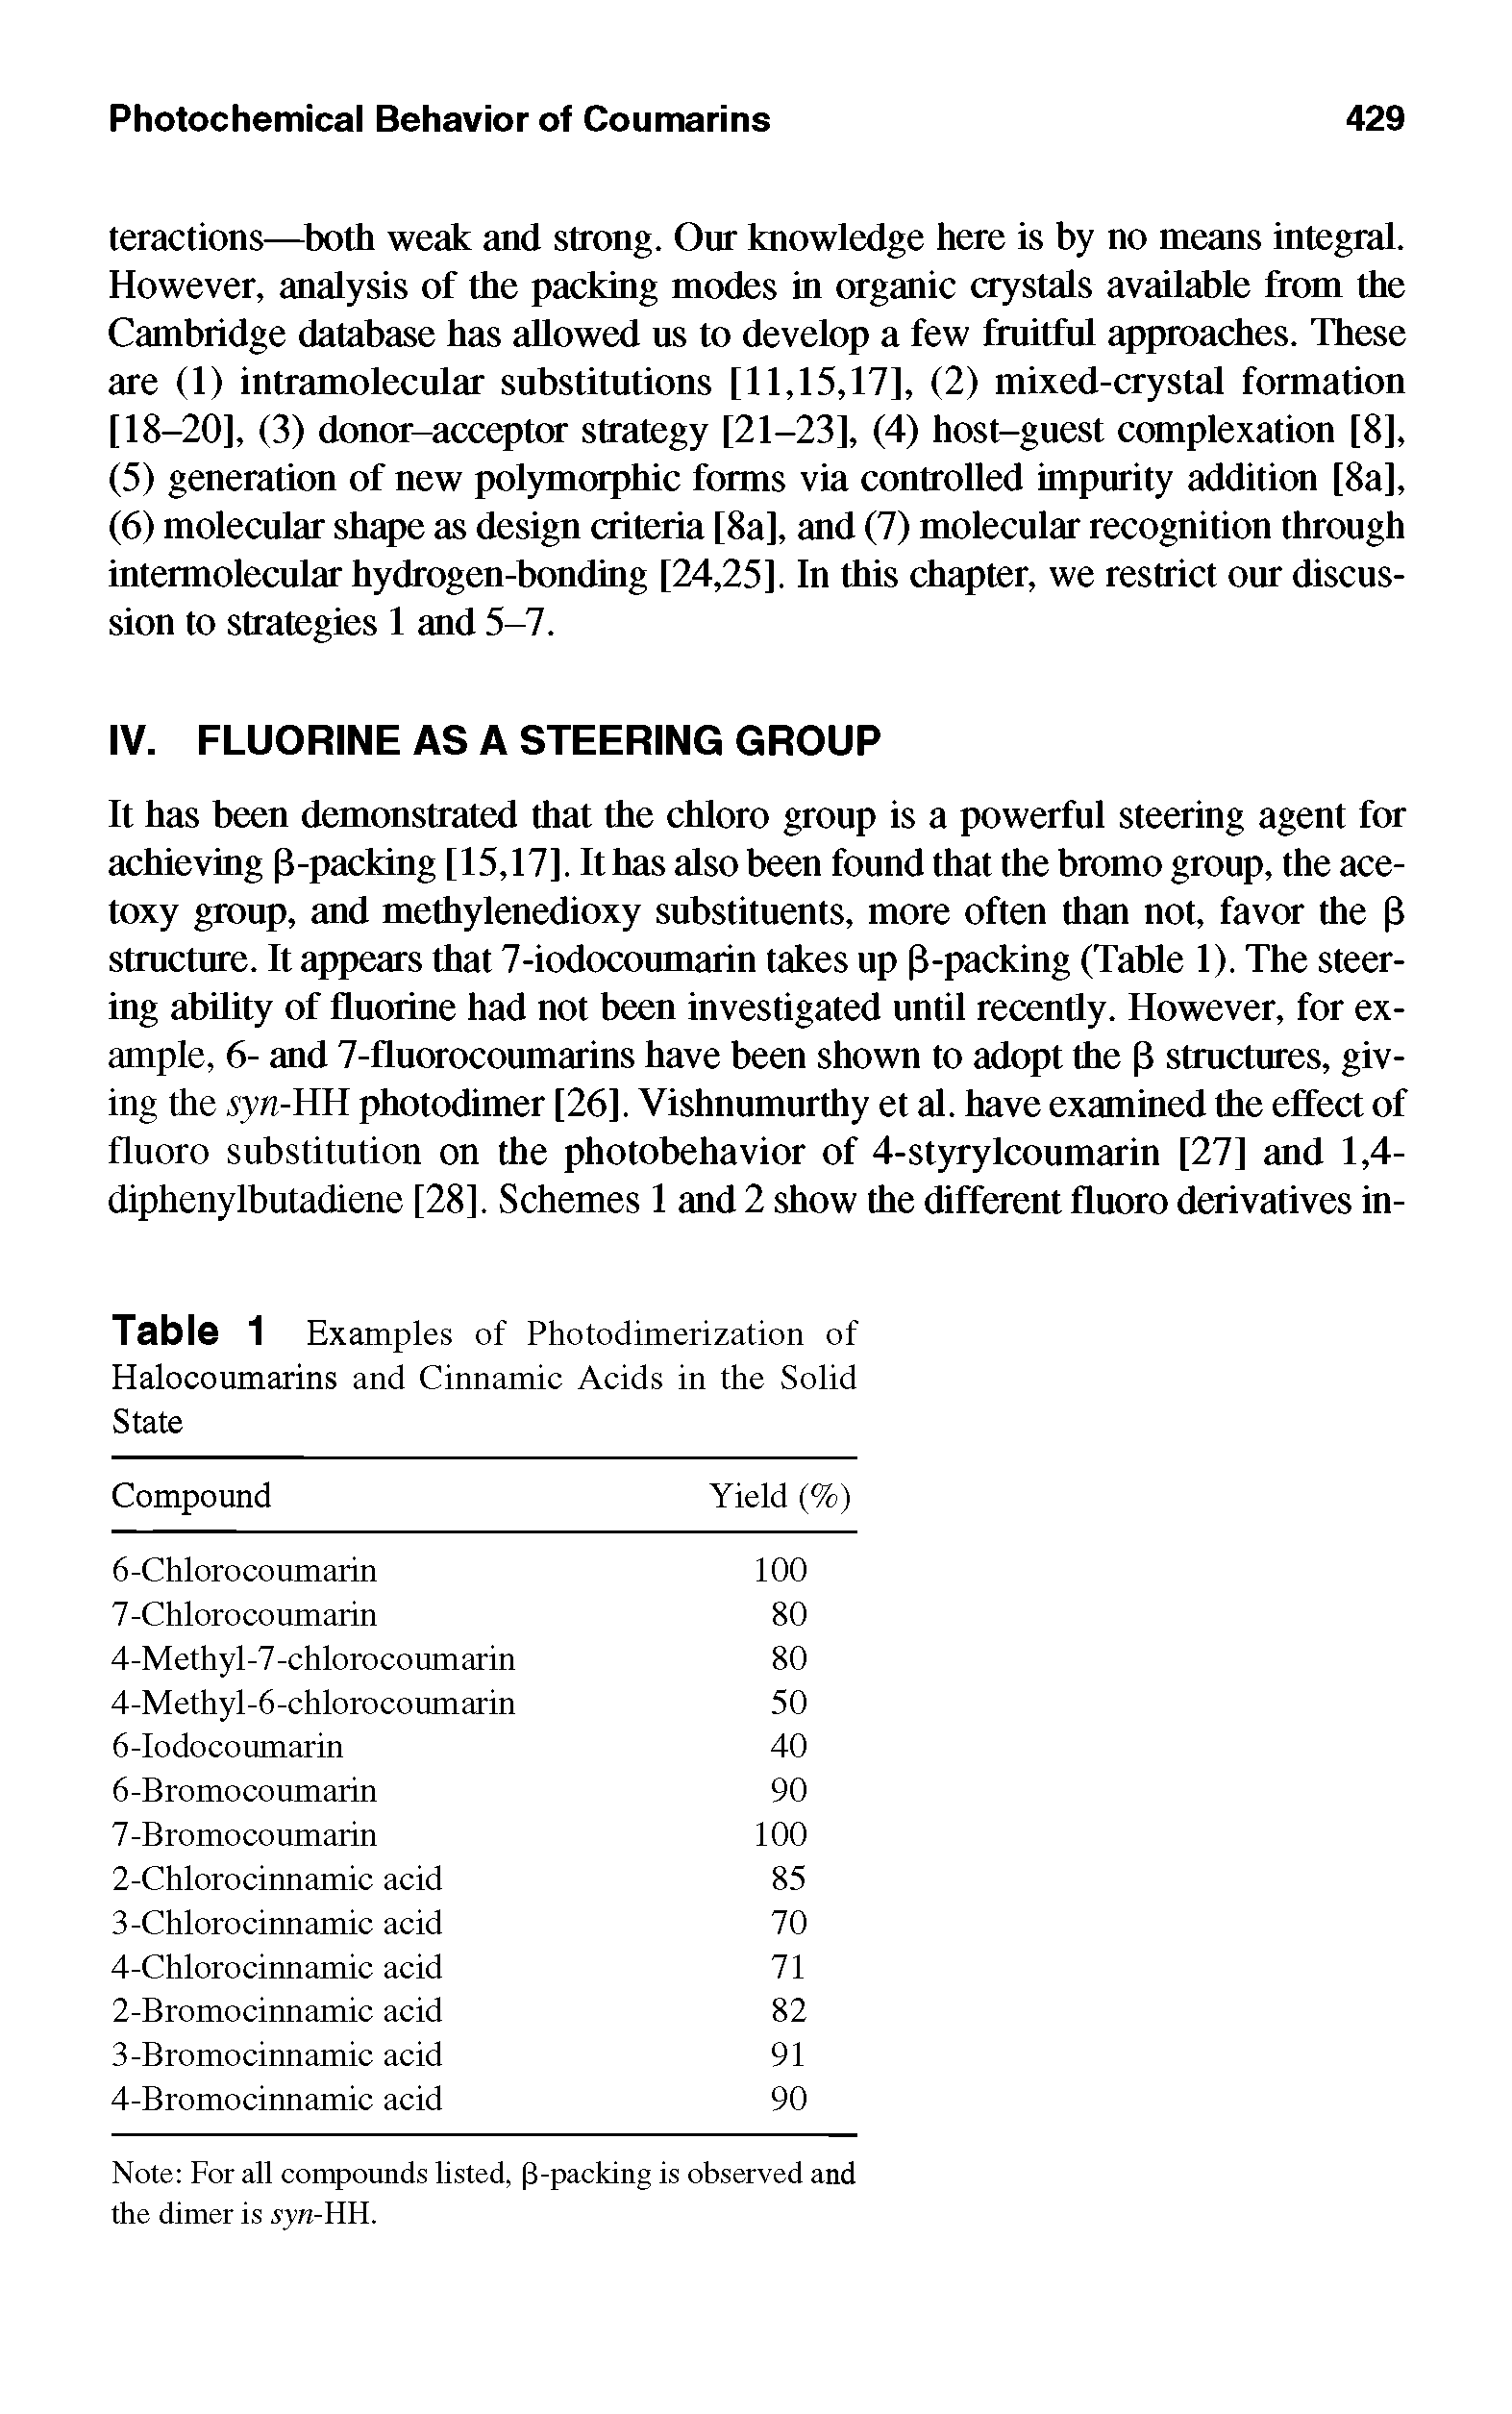 Table 1 Examples of Photodimerization of Halocoumarins and Cinnamic Acids in the Solid State...